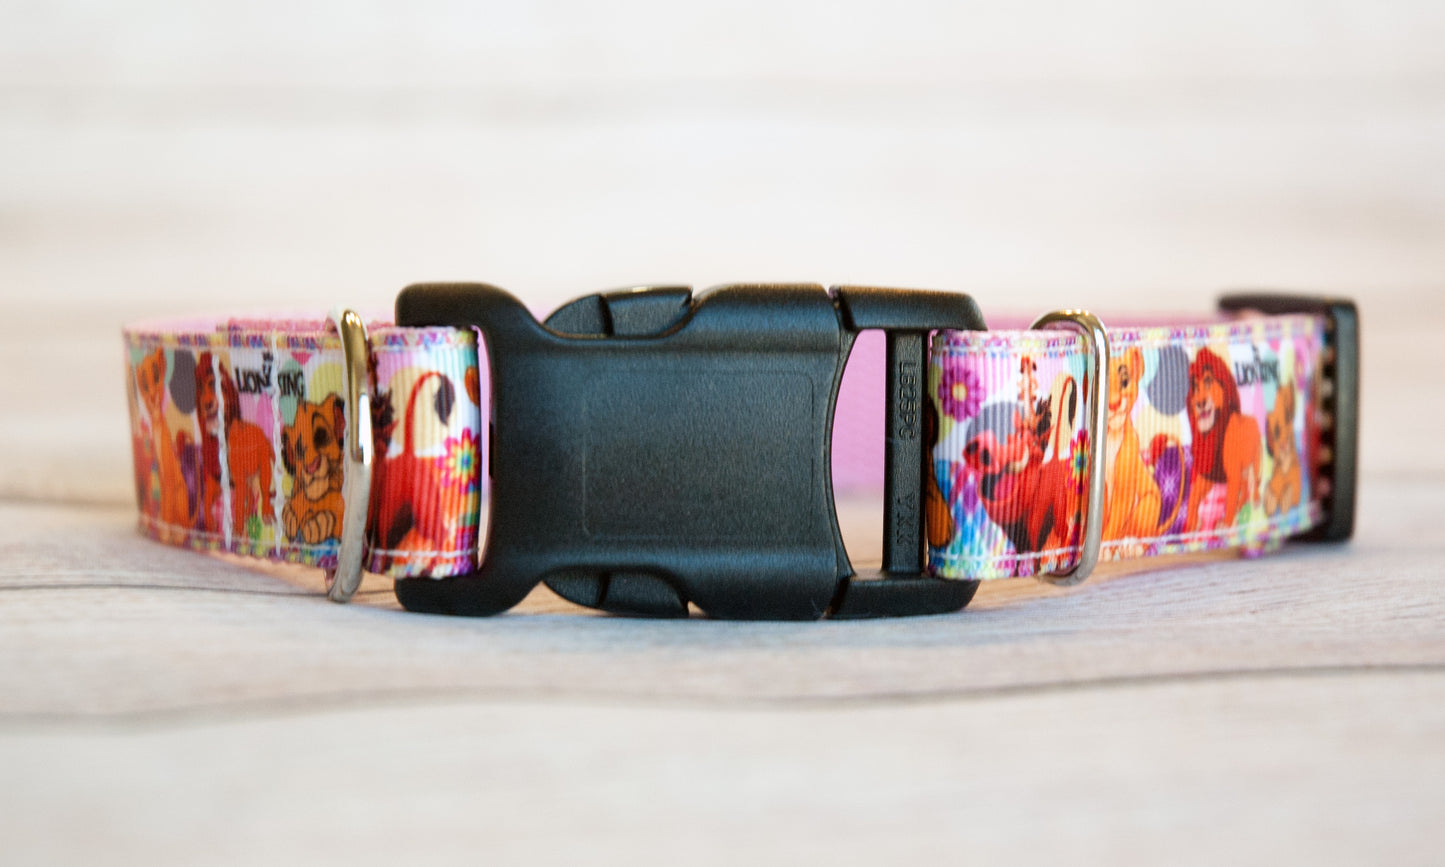 Lion King dog collar, Lions and friends dog collar, 1" wide